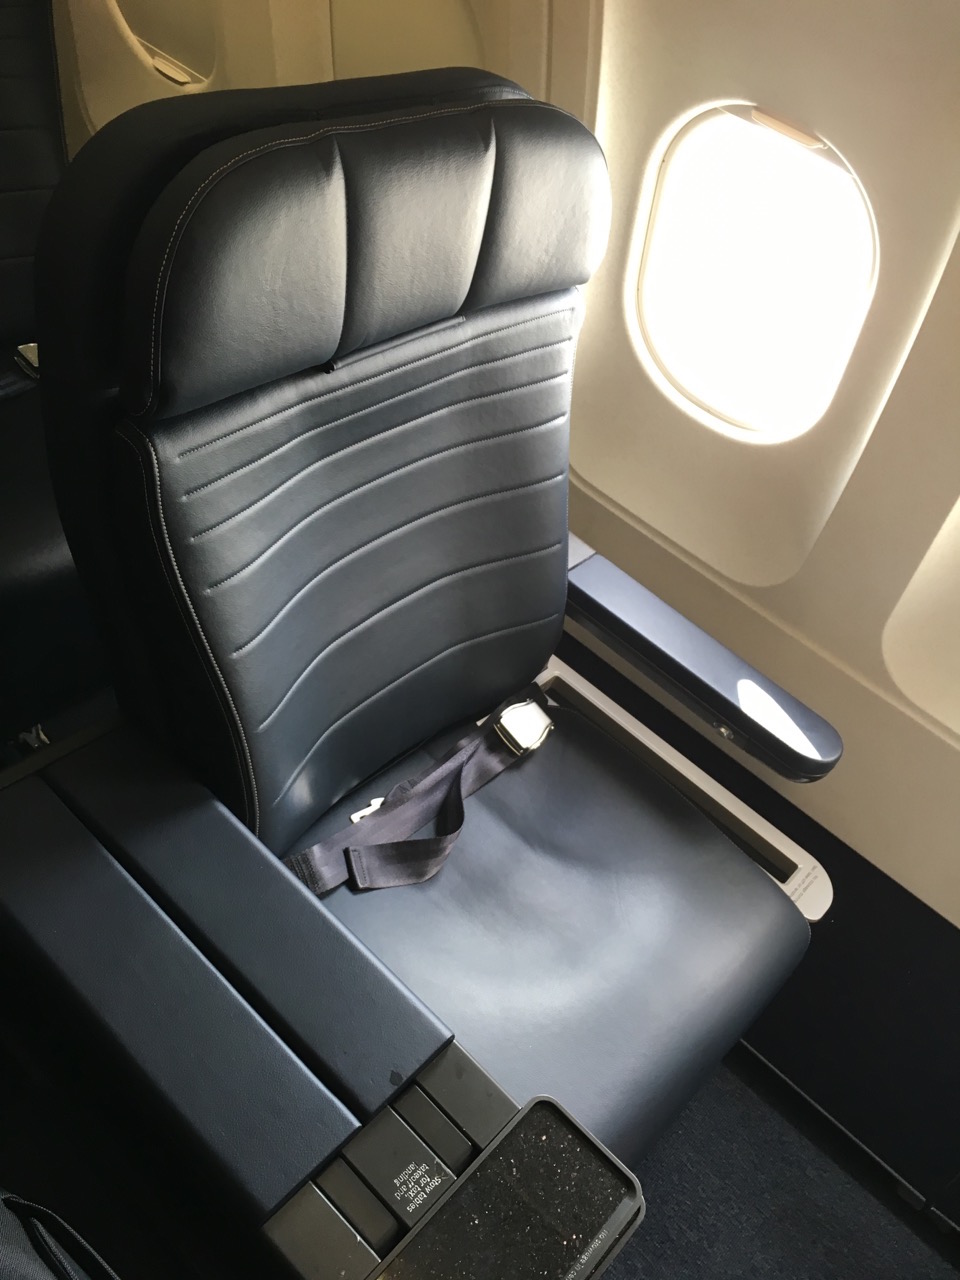 New United Airlines First Class A320